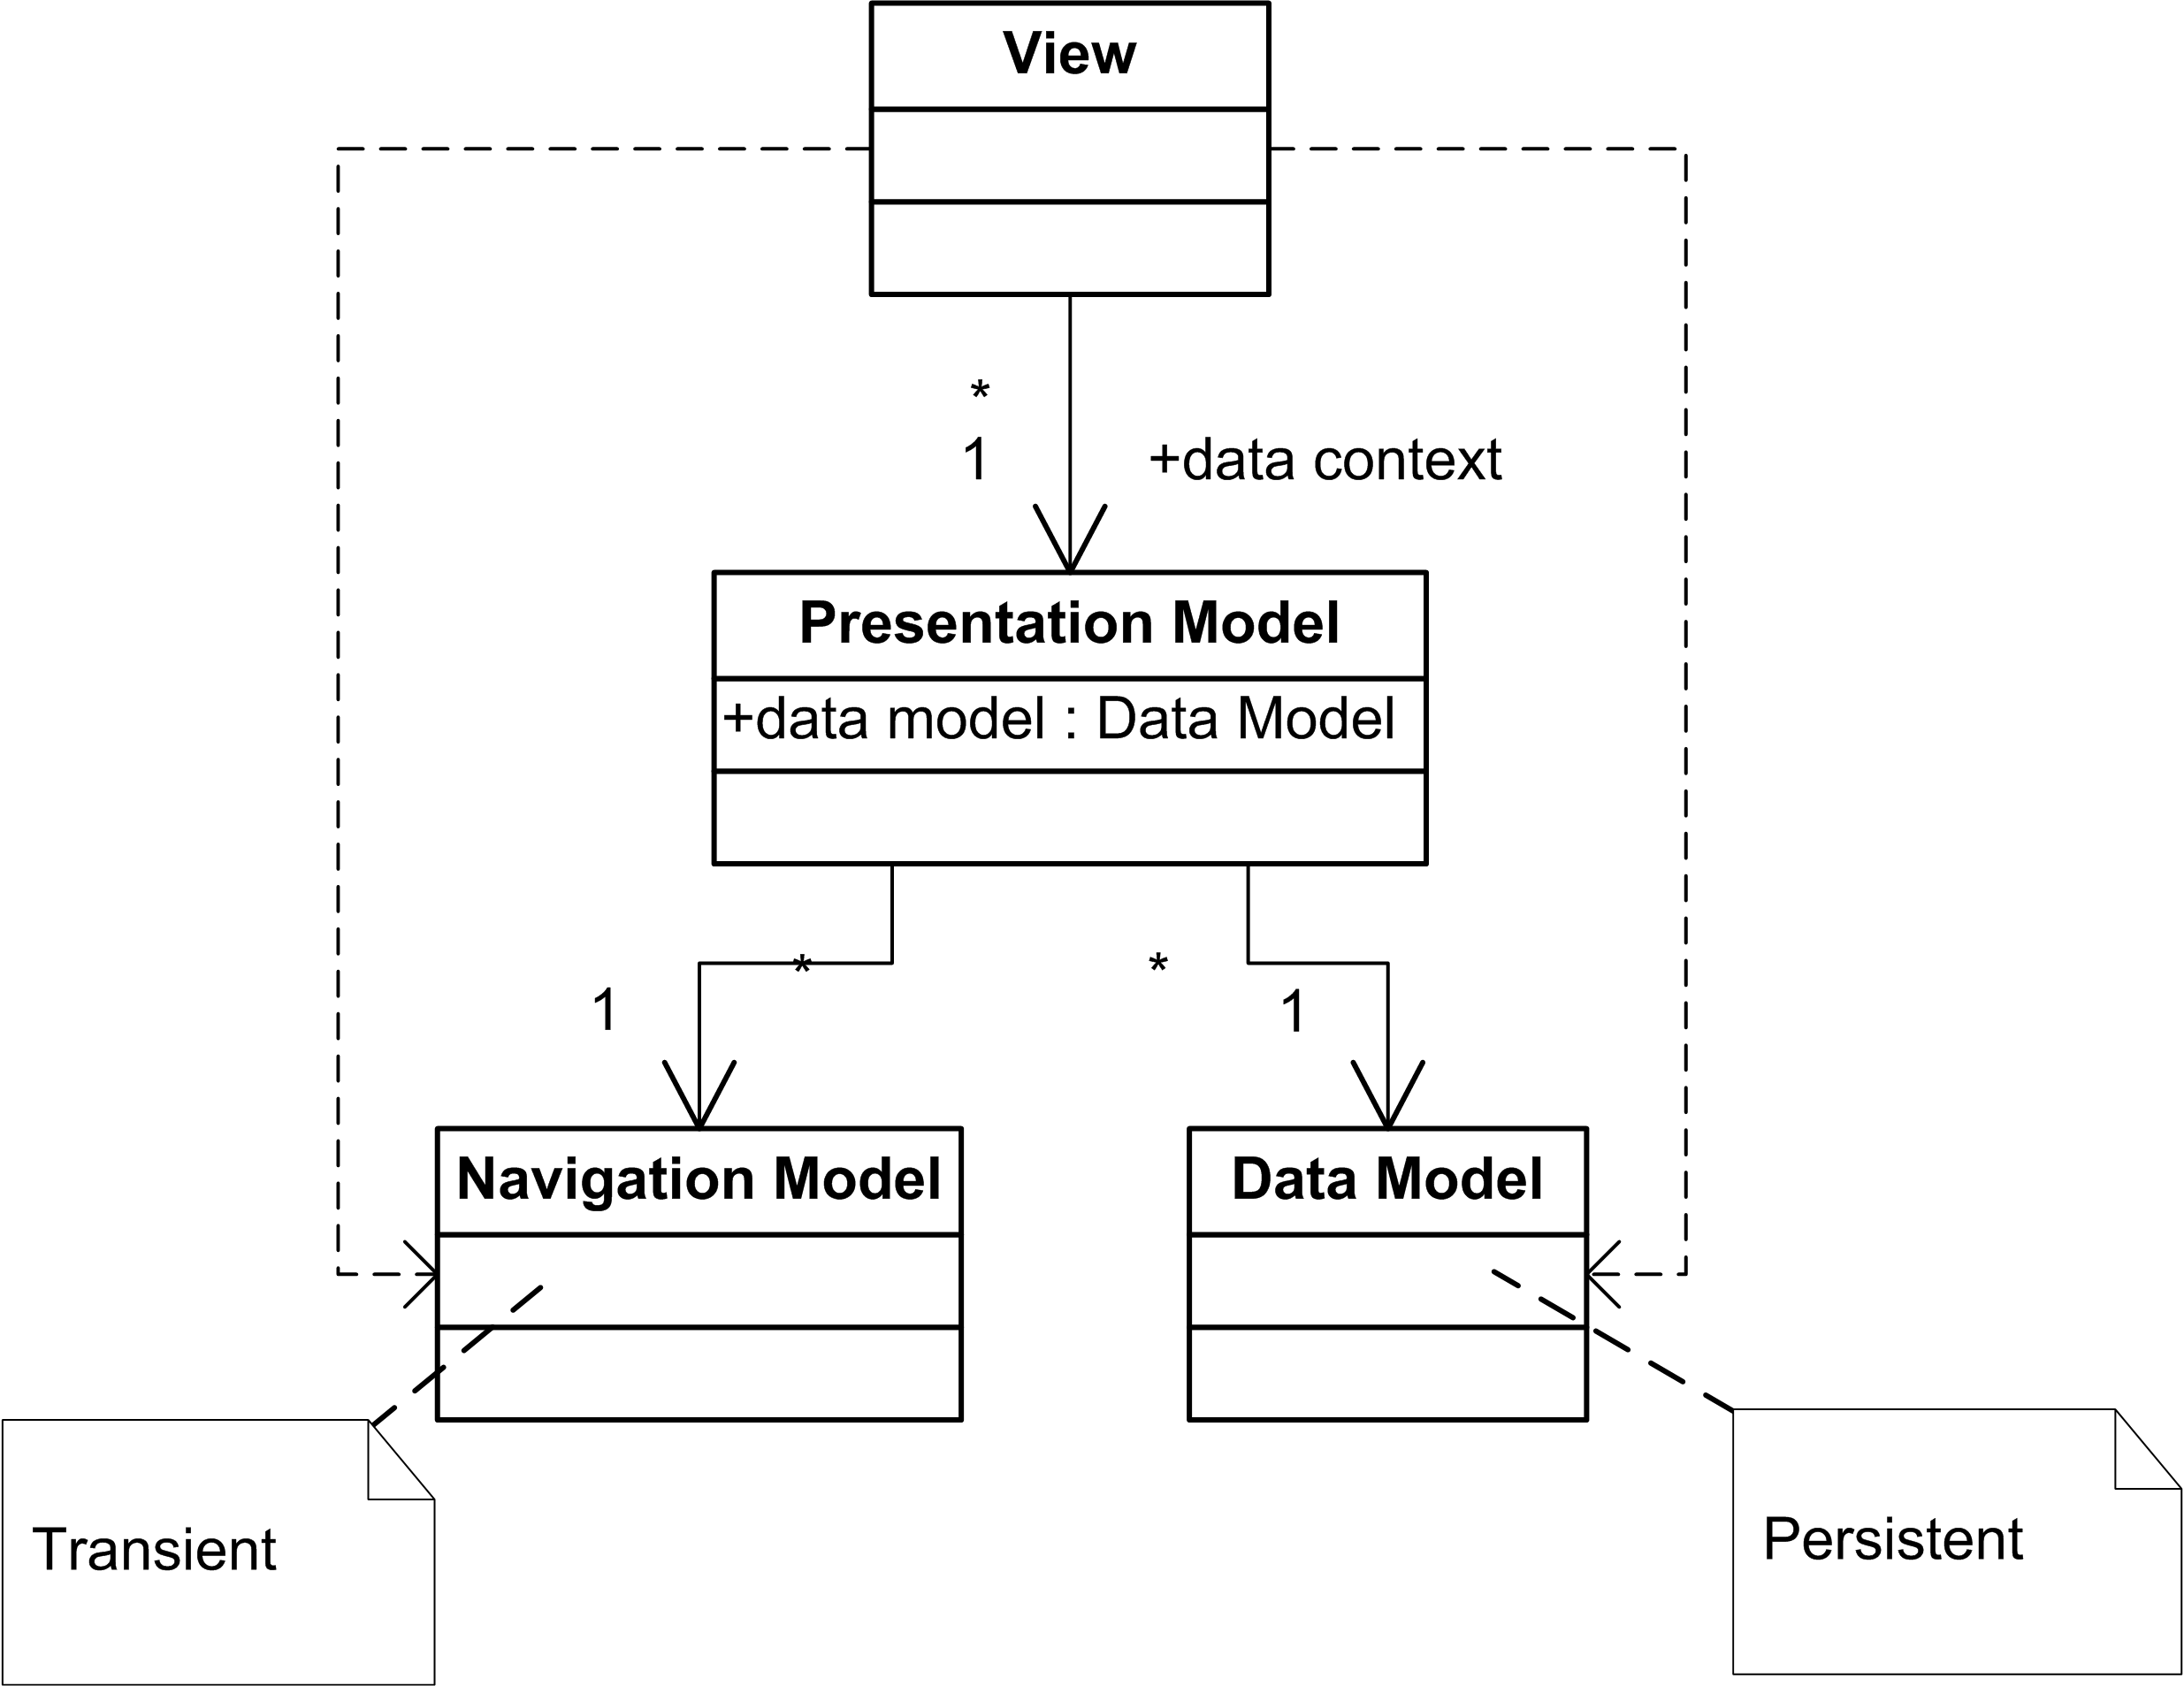 Figure 2: Structure diagram of the Navigation Model pattern. The navigation model holds transient state, while the data model holds persistent state.